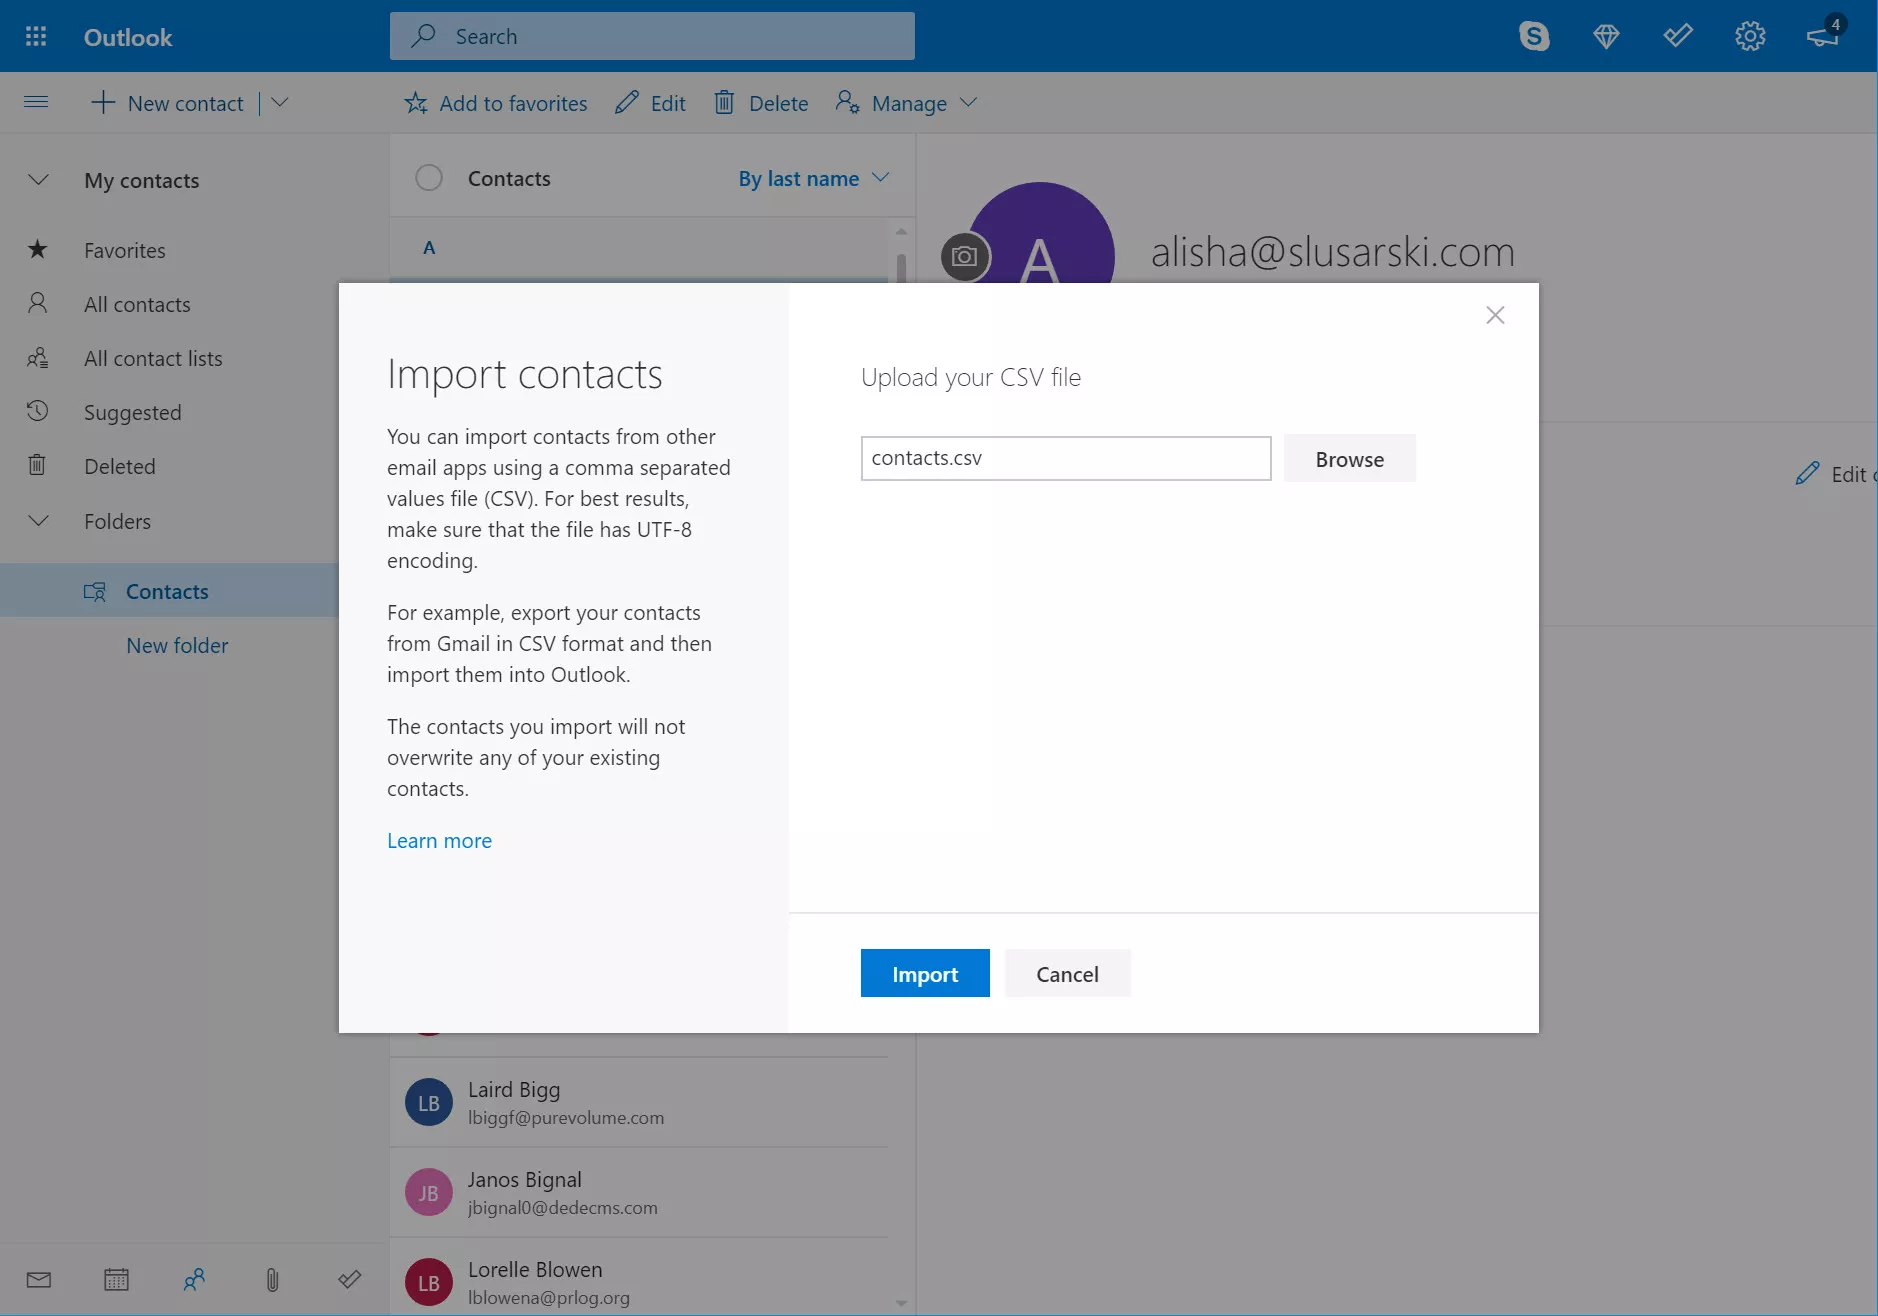 Import contacts screen in Outlook.com